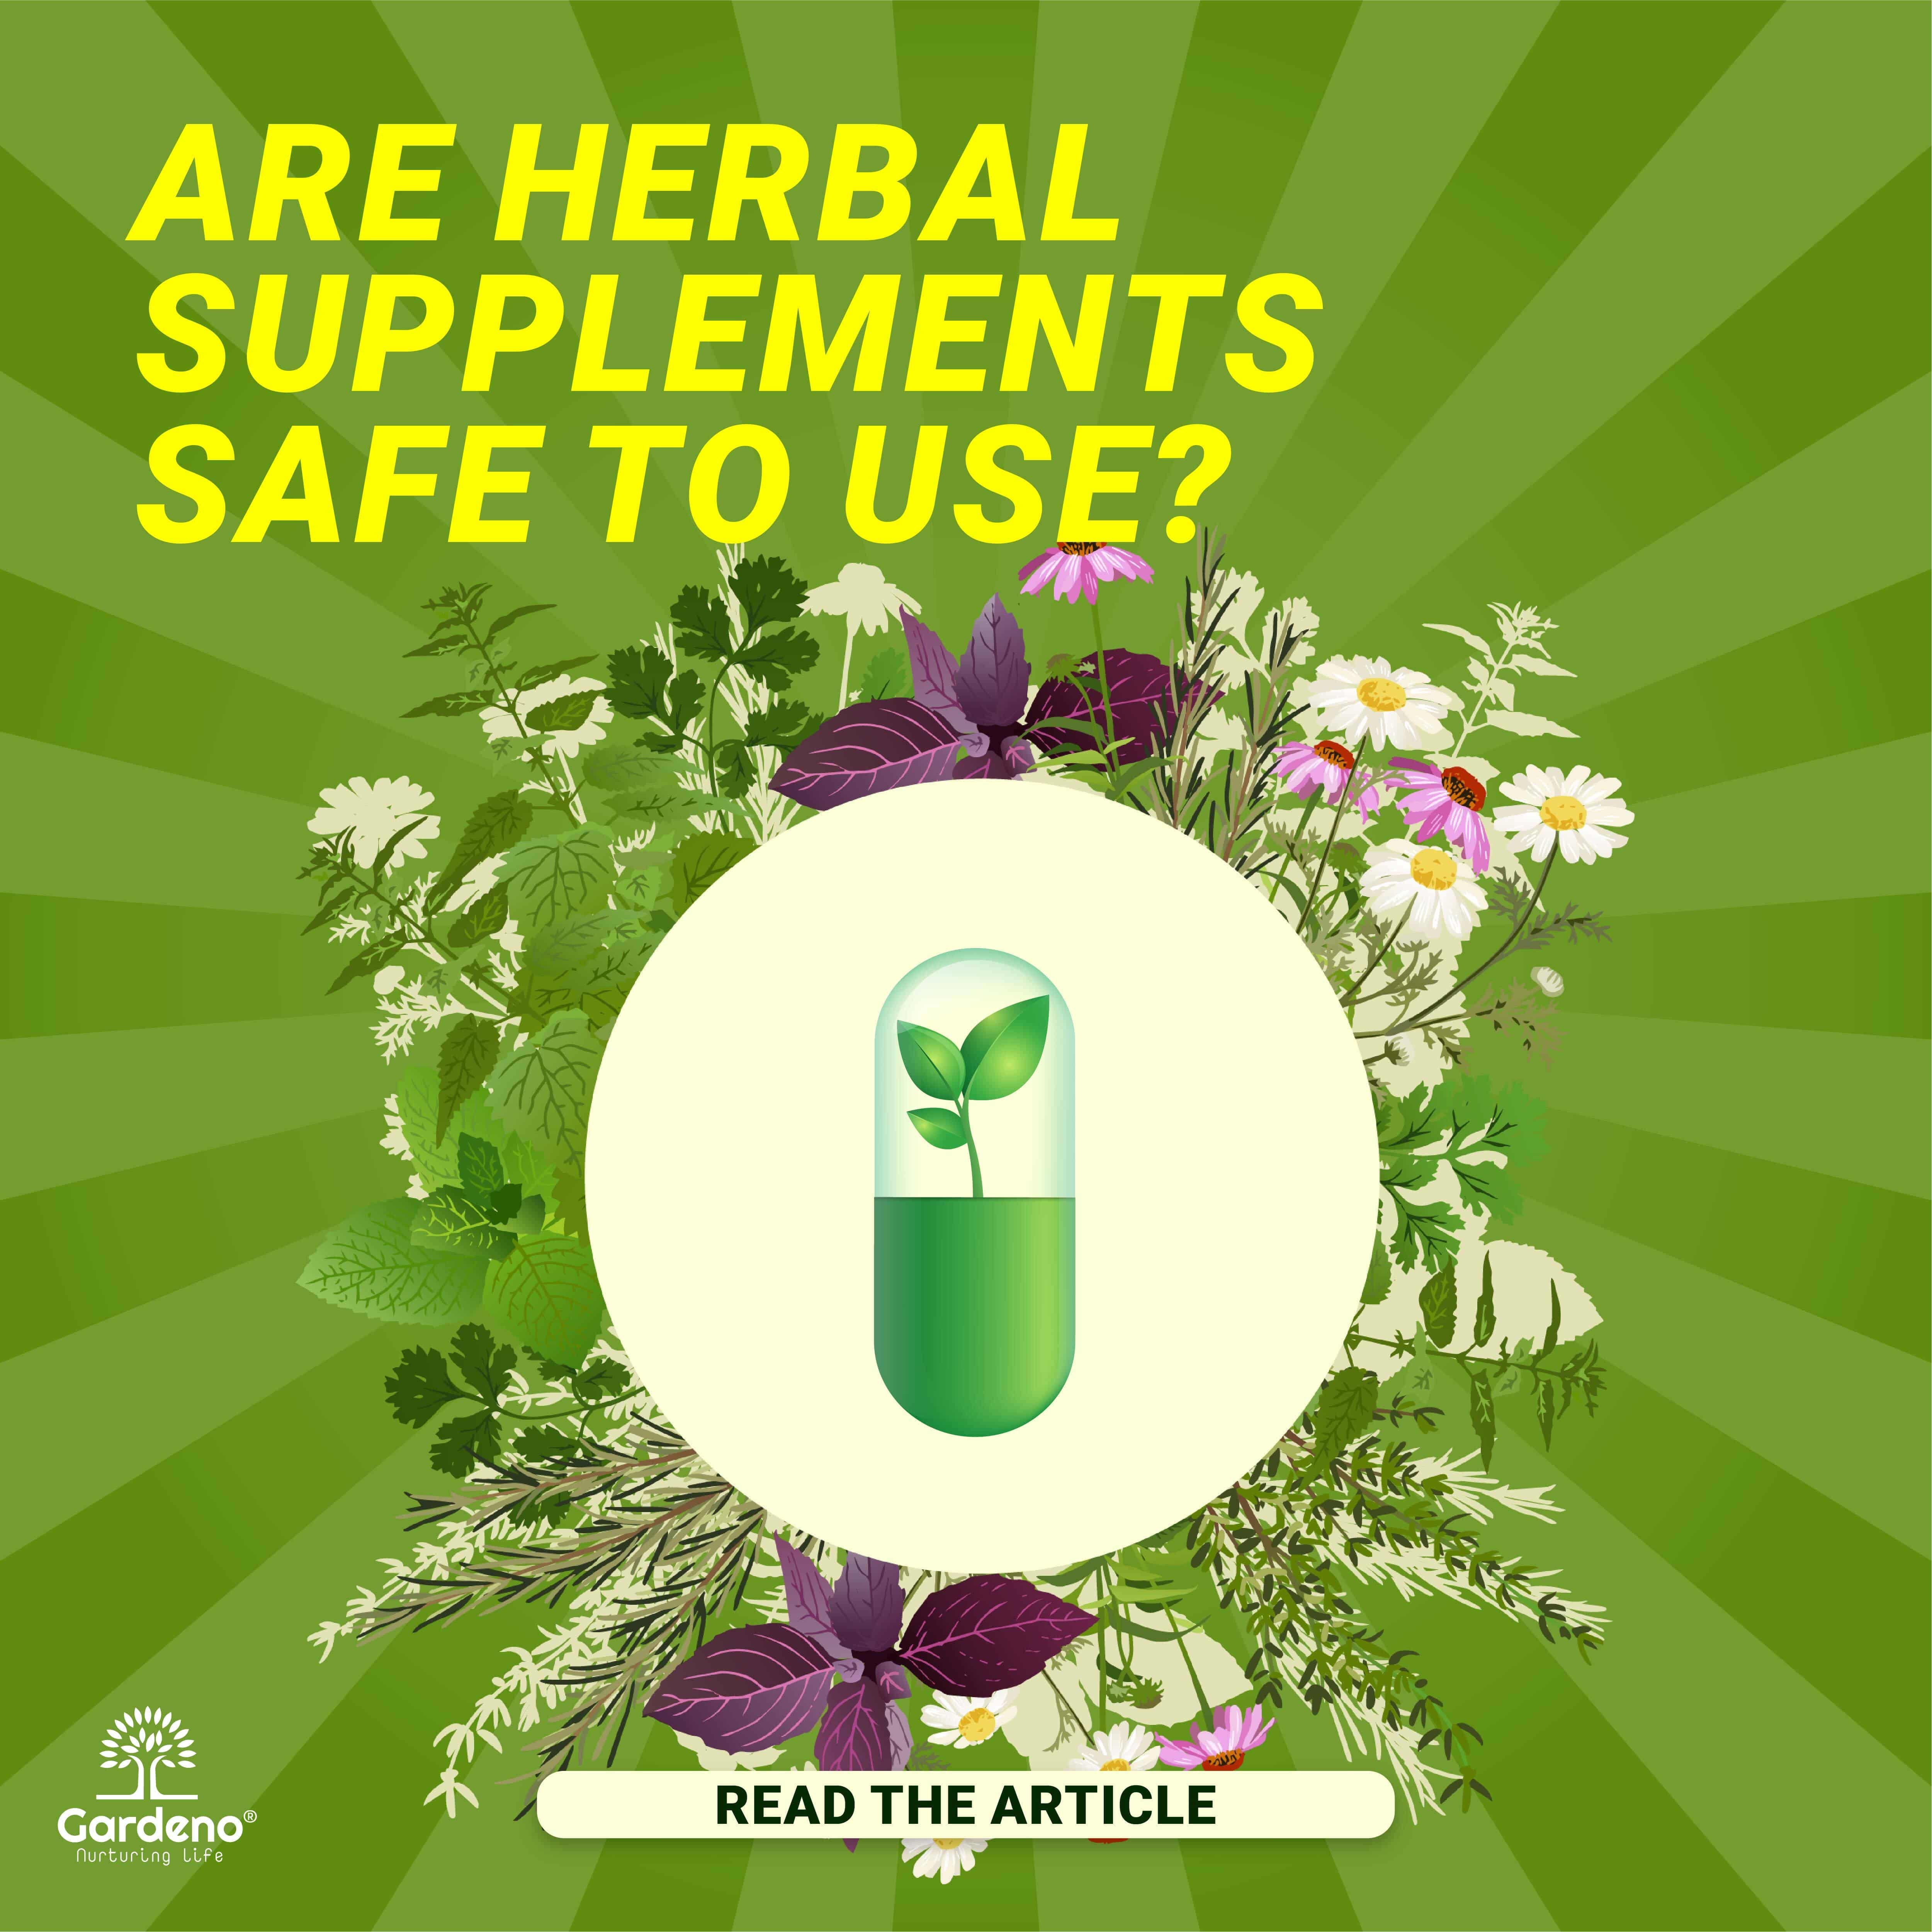 Are Herbal Supplements Safe To Use?